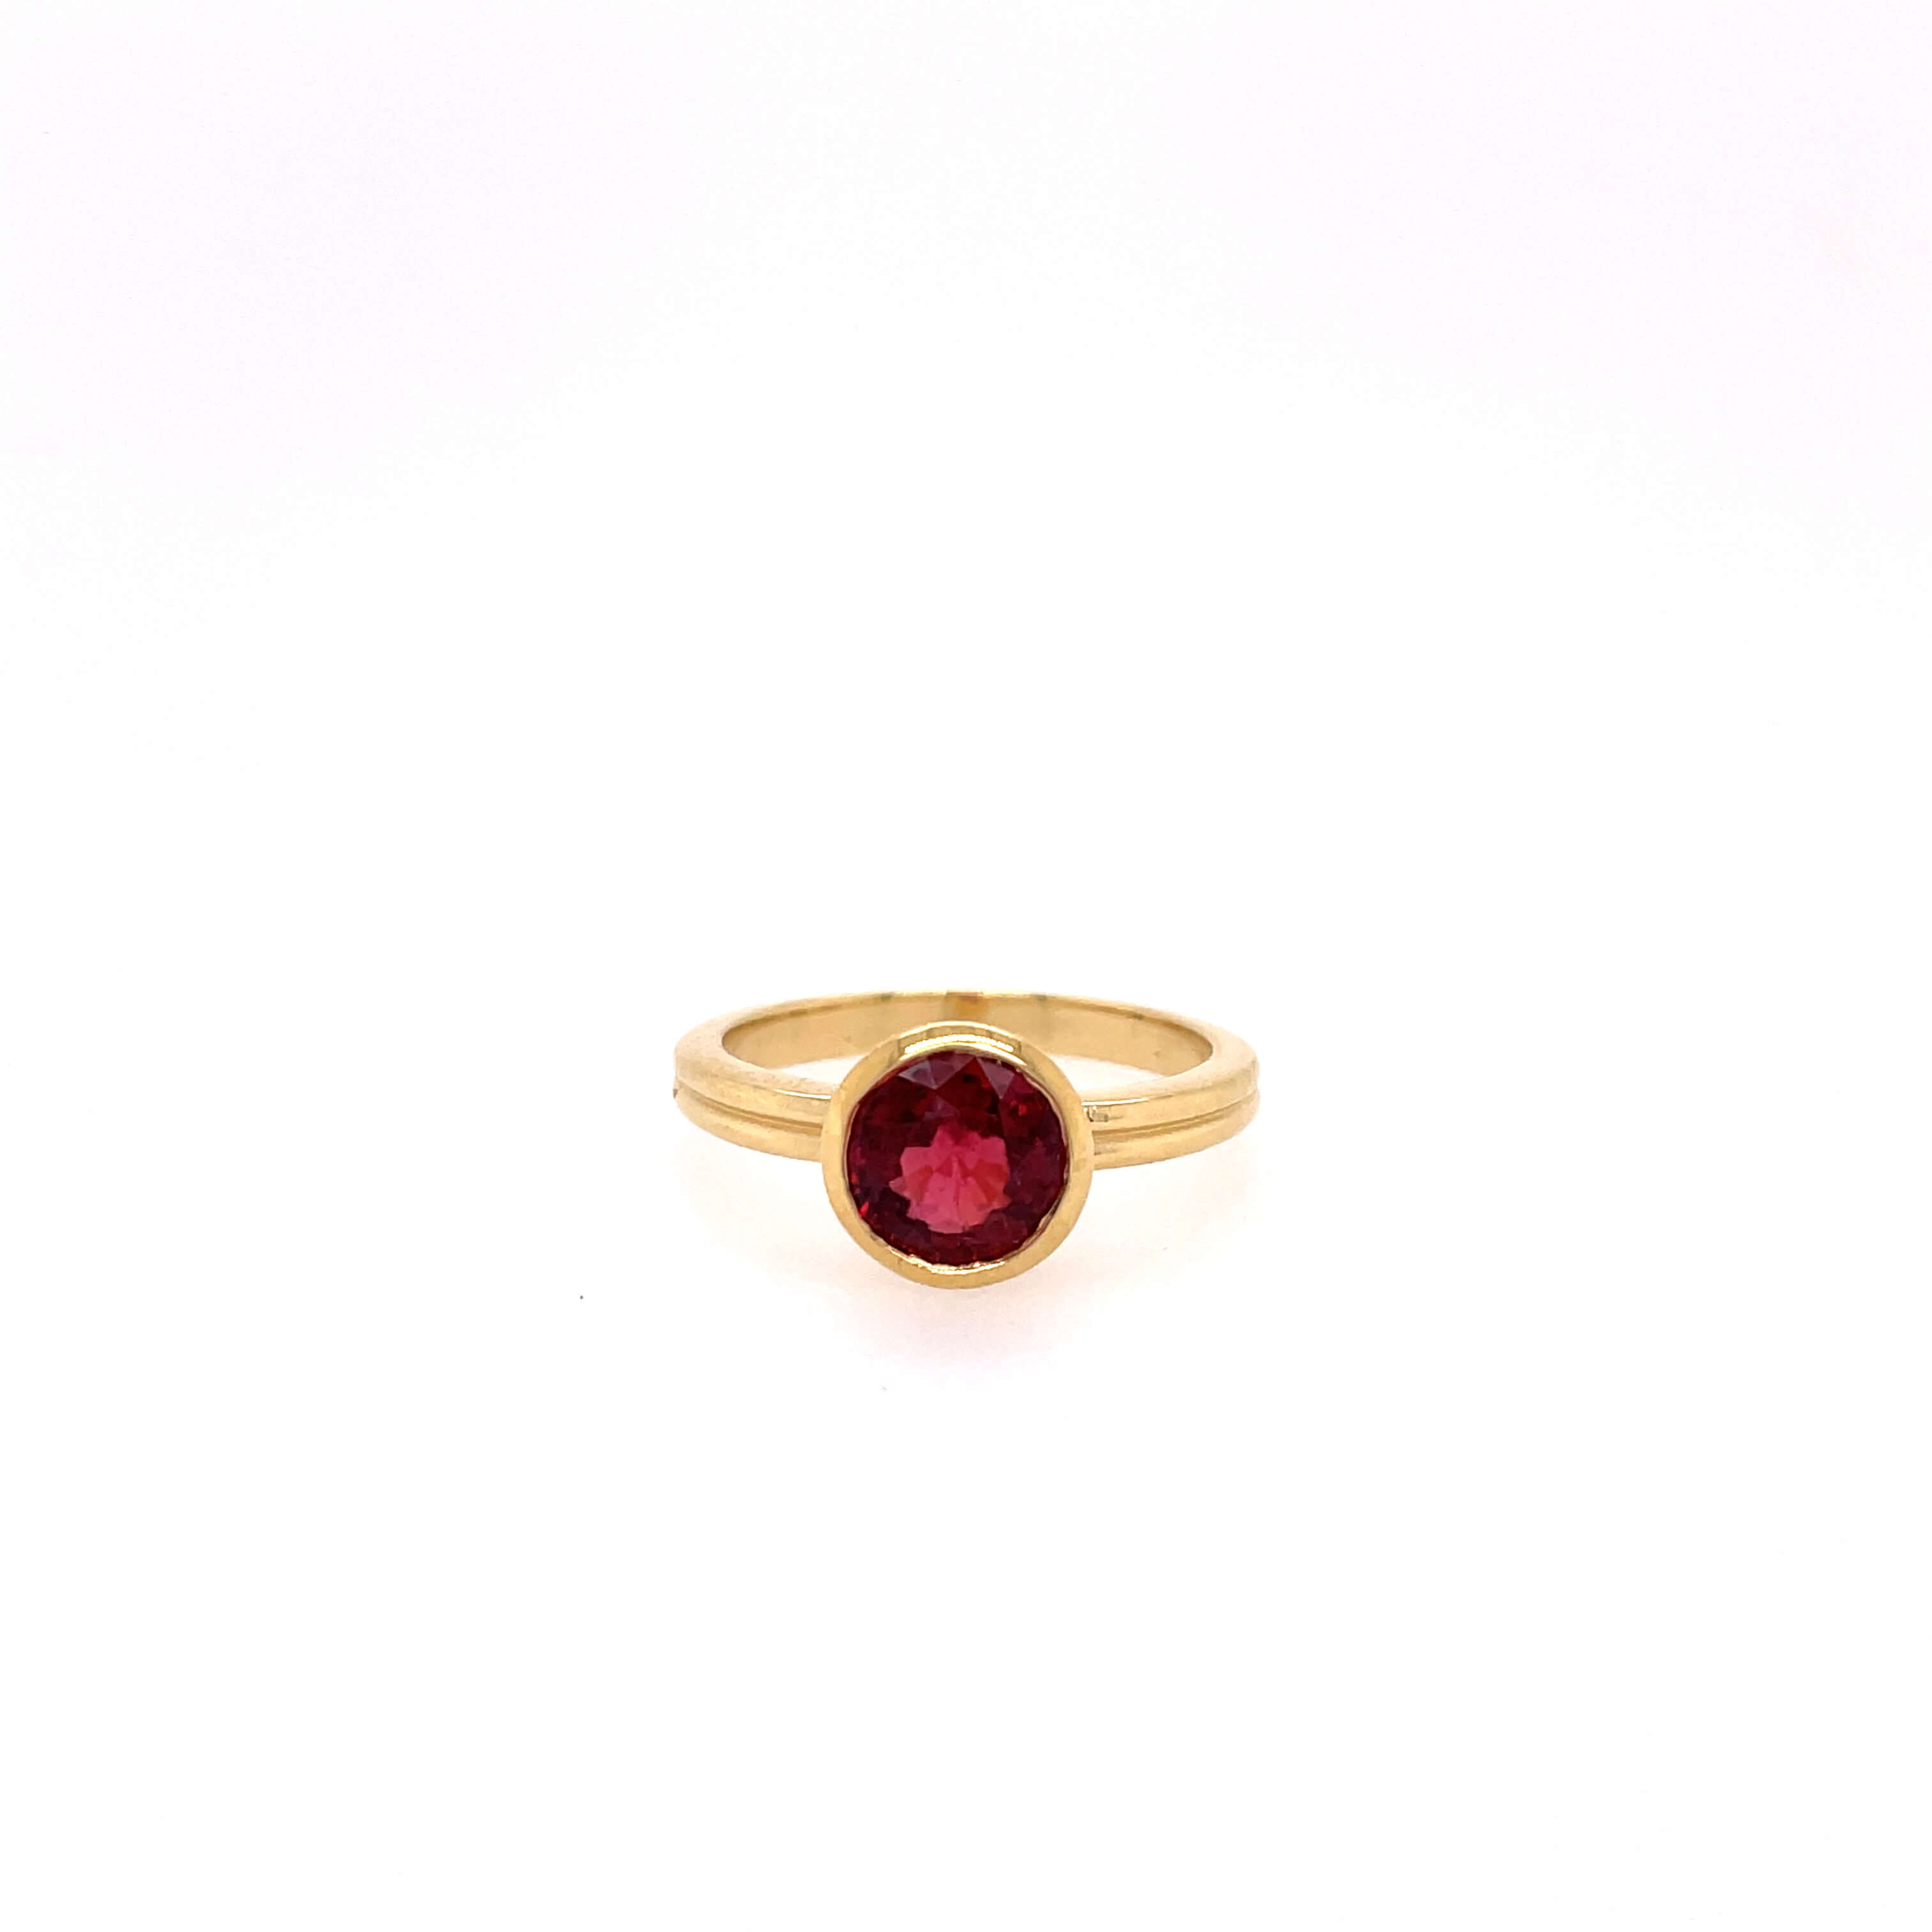 One yellow gold ring with a plain band and a bezel set round shaped ruby gemtone in the center, set against a white background.